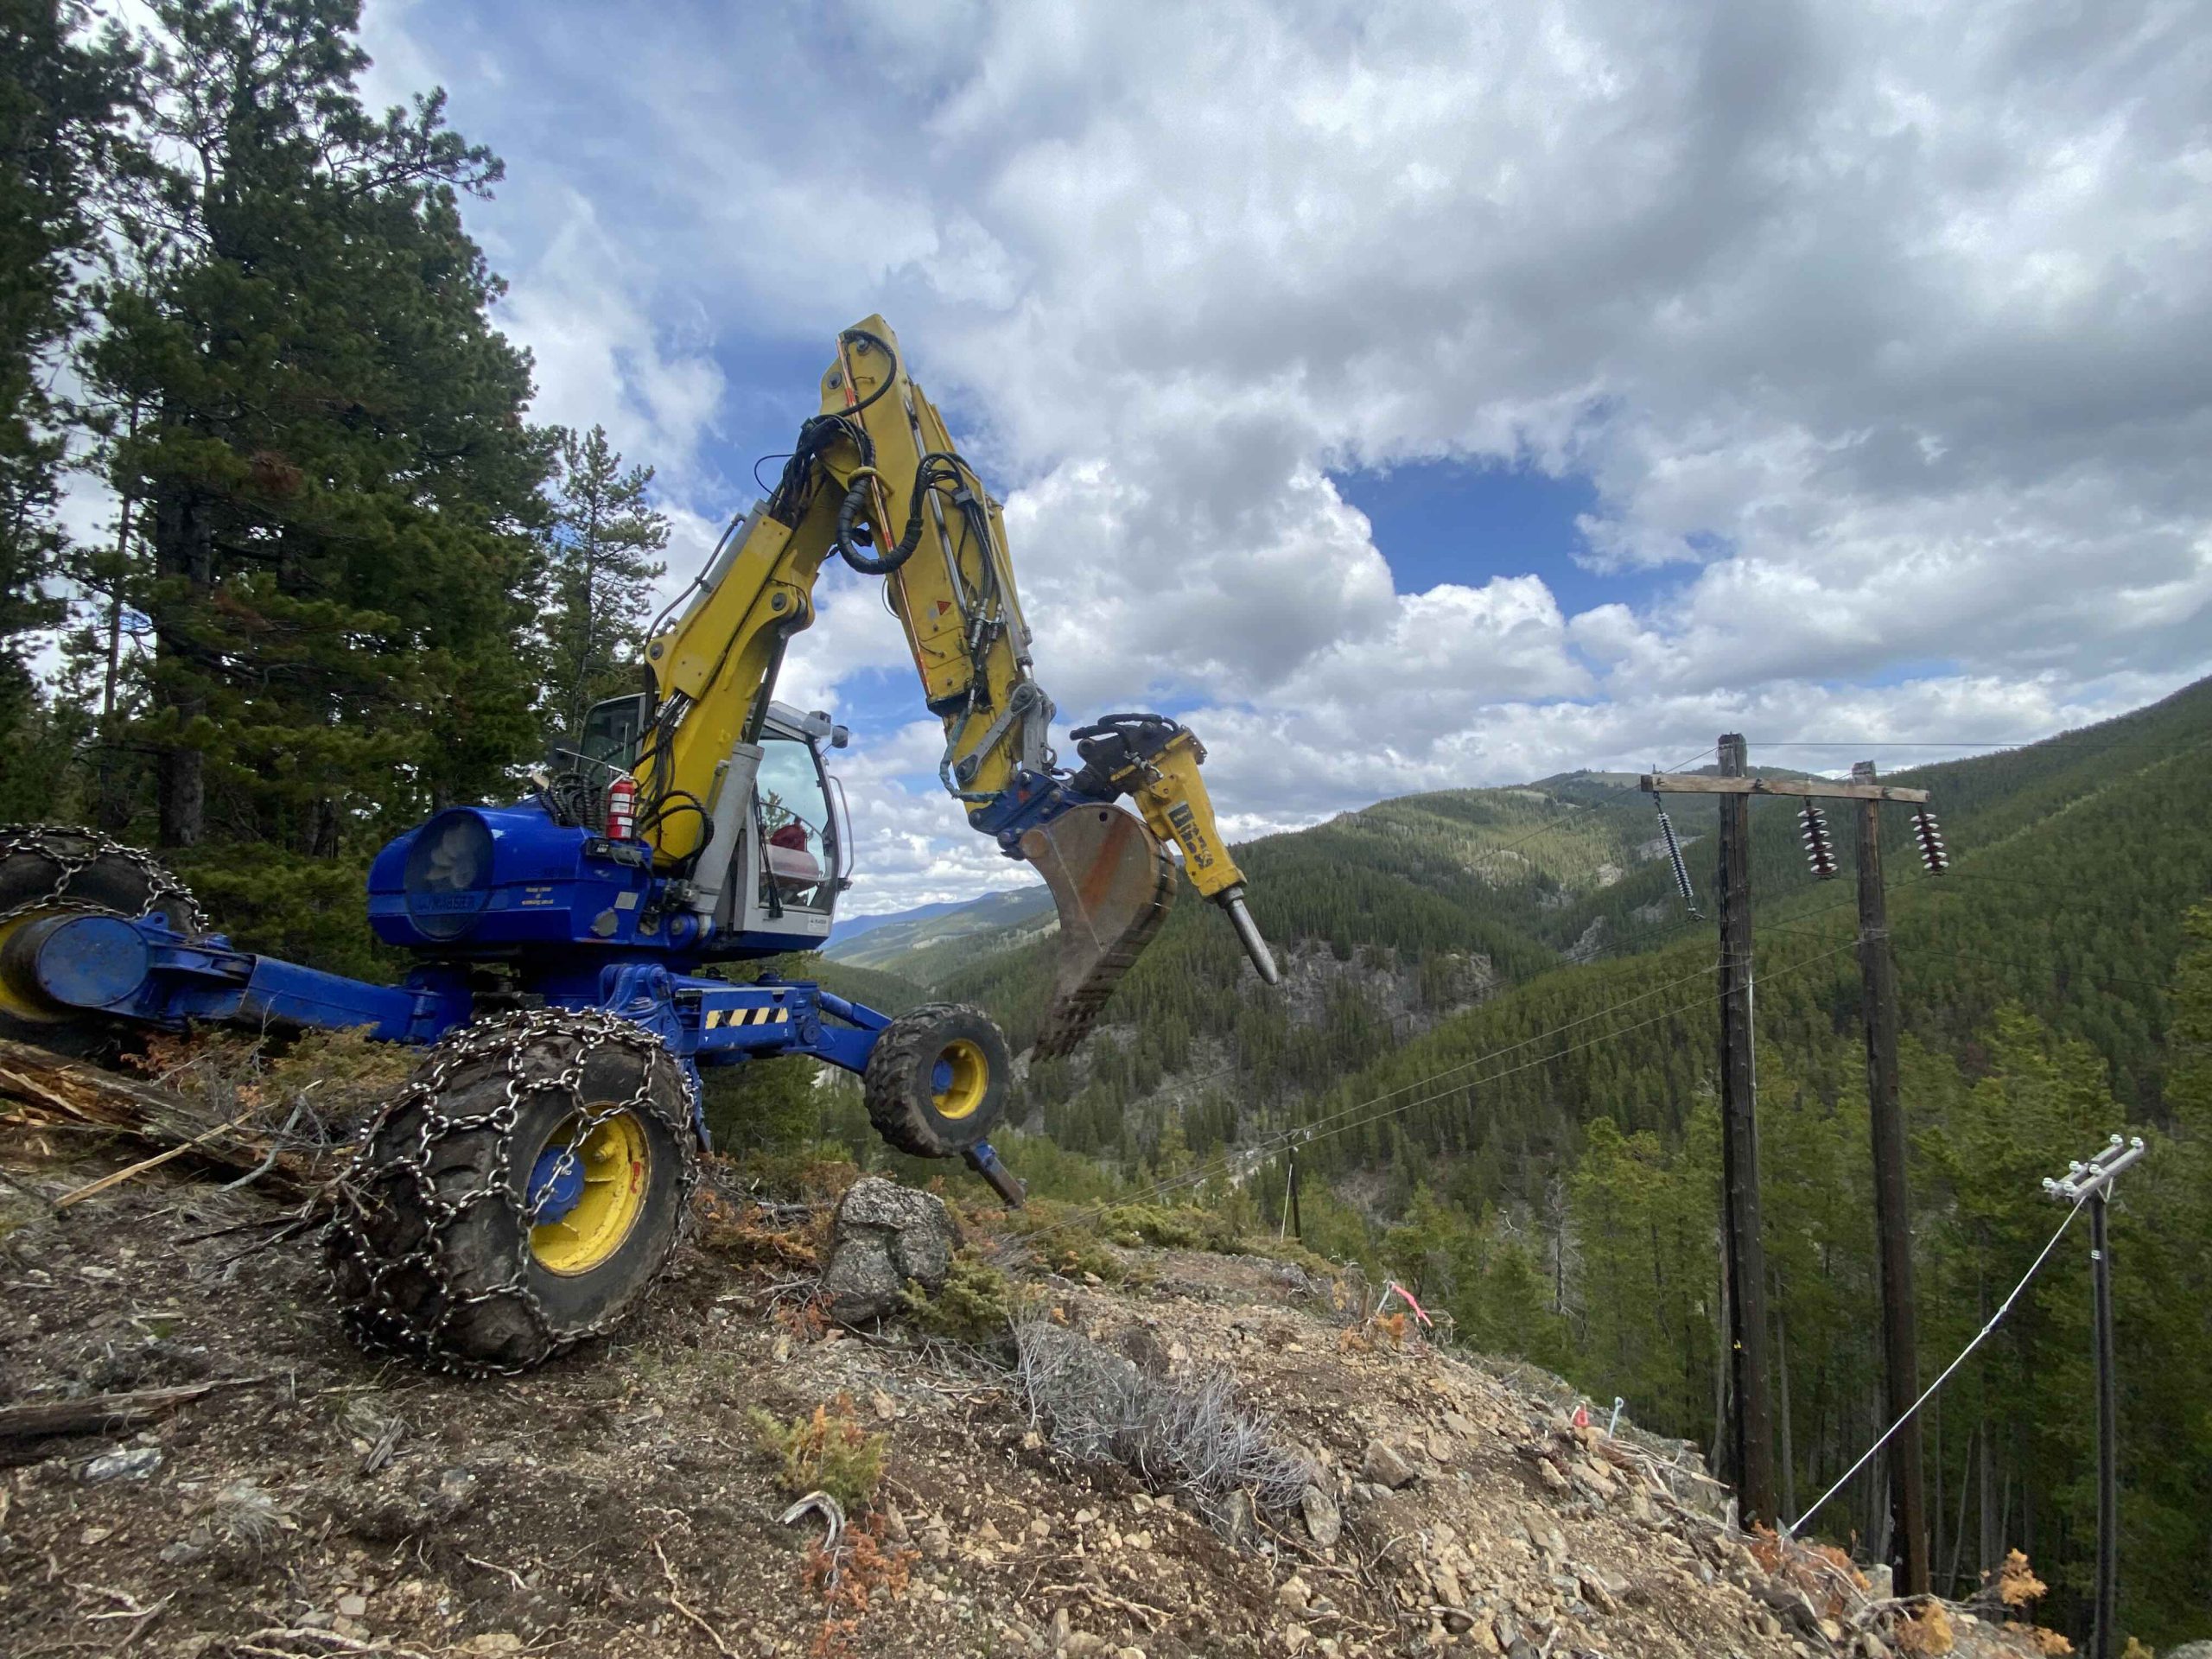 Spider Drilling on Steep Slope